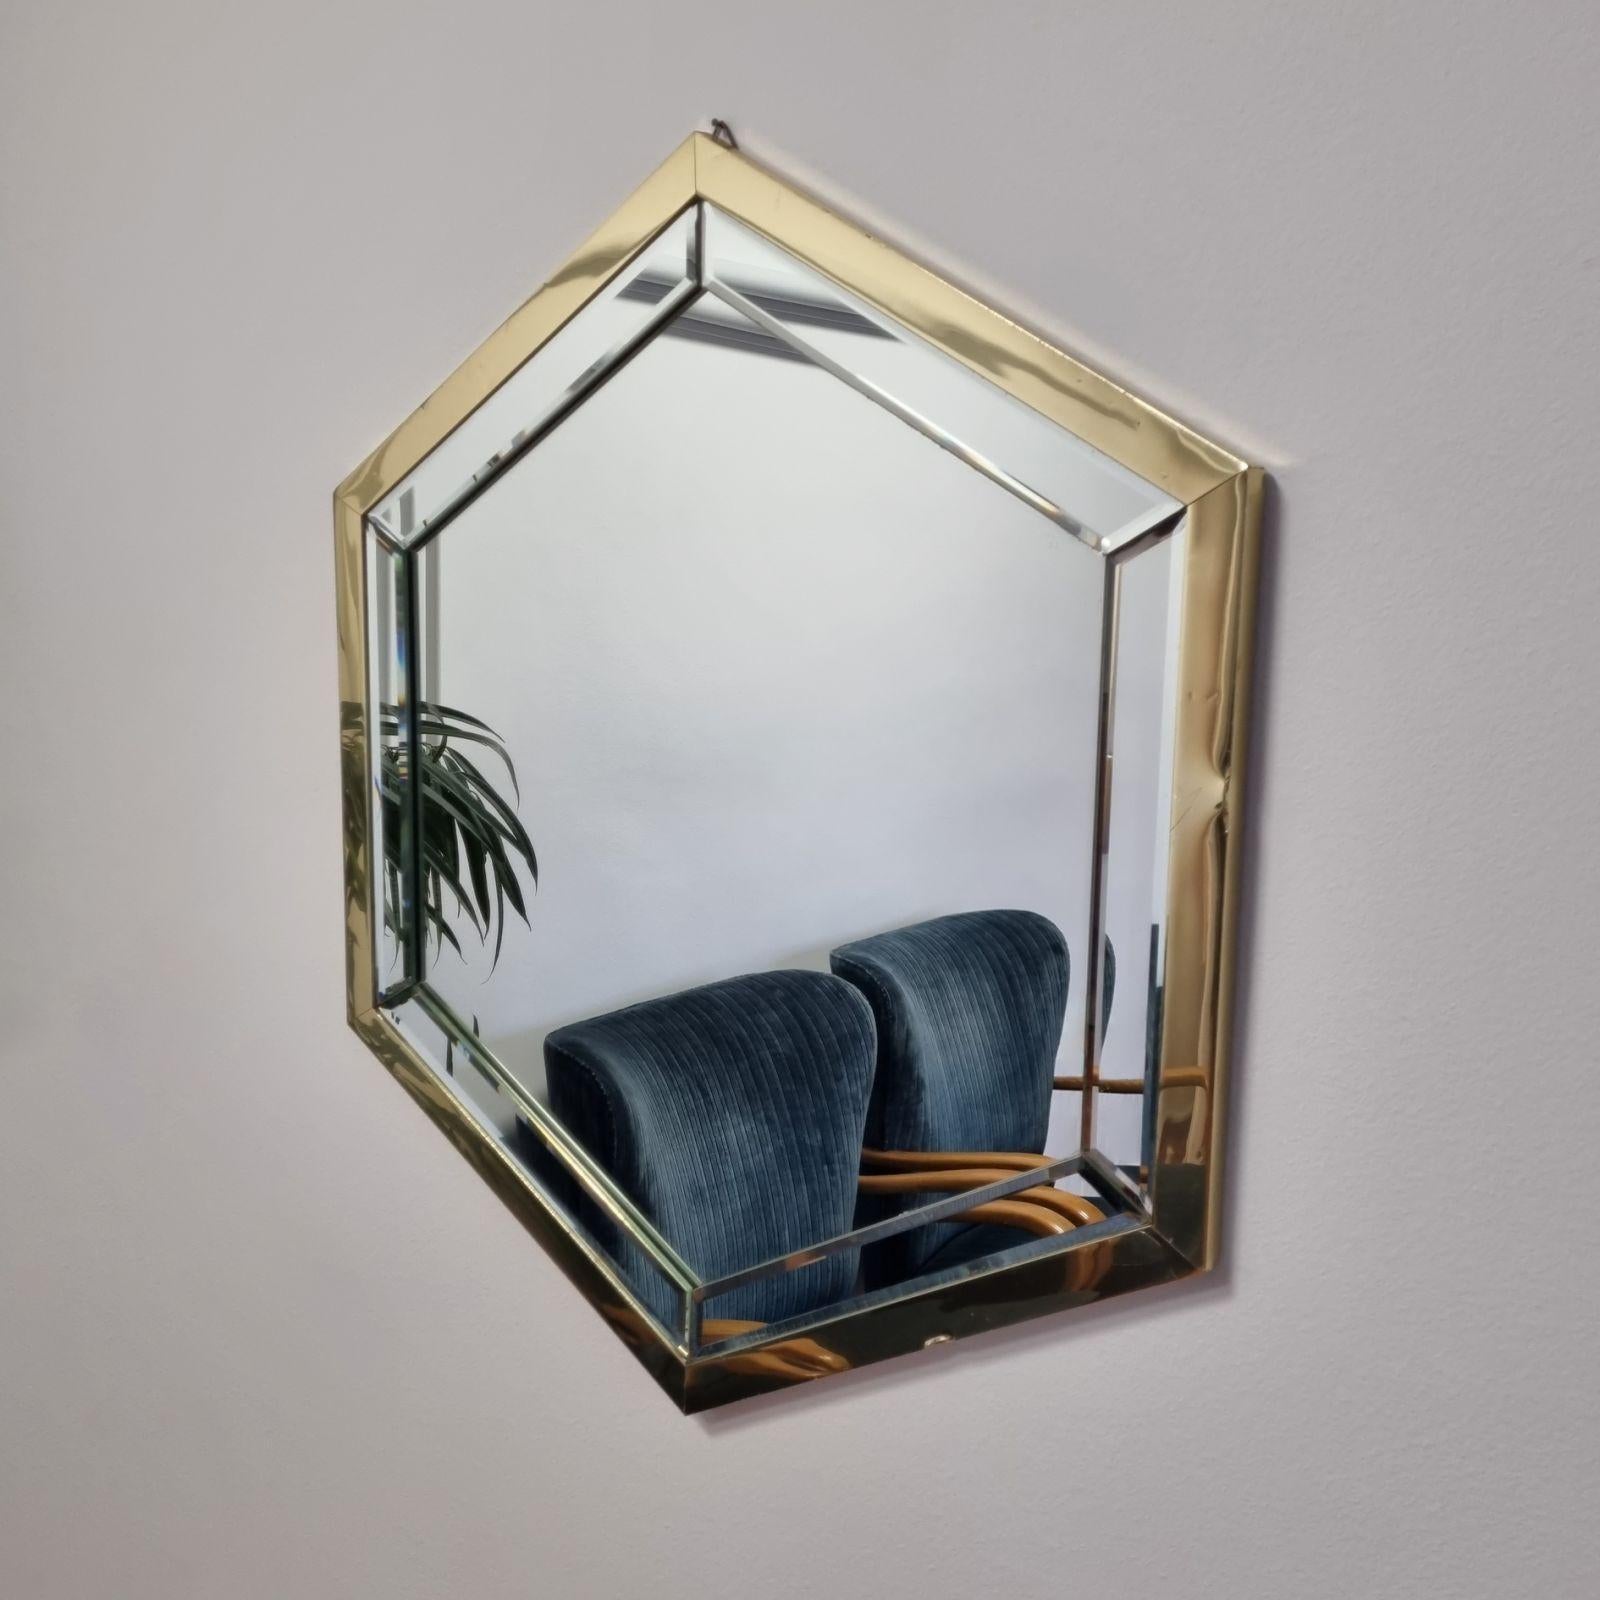 Aluminium mirror made in Italy in the 80s. The item is in very good vintage condition with signs of use. All visible on photos.